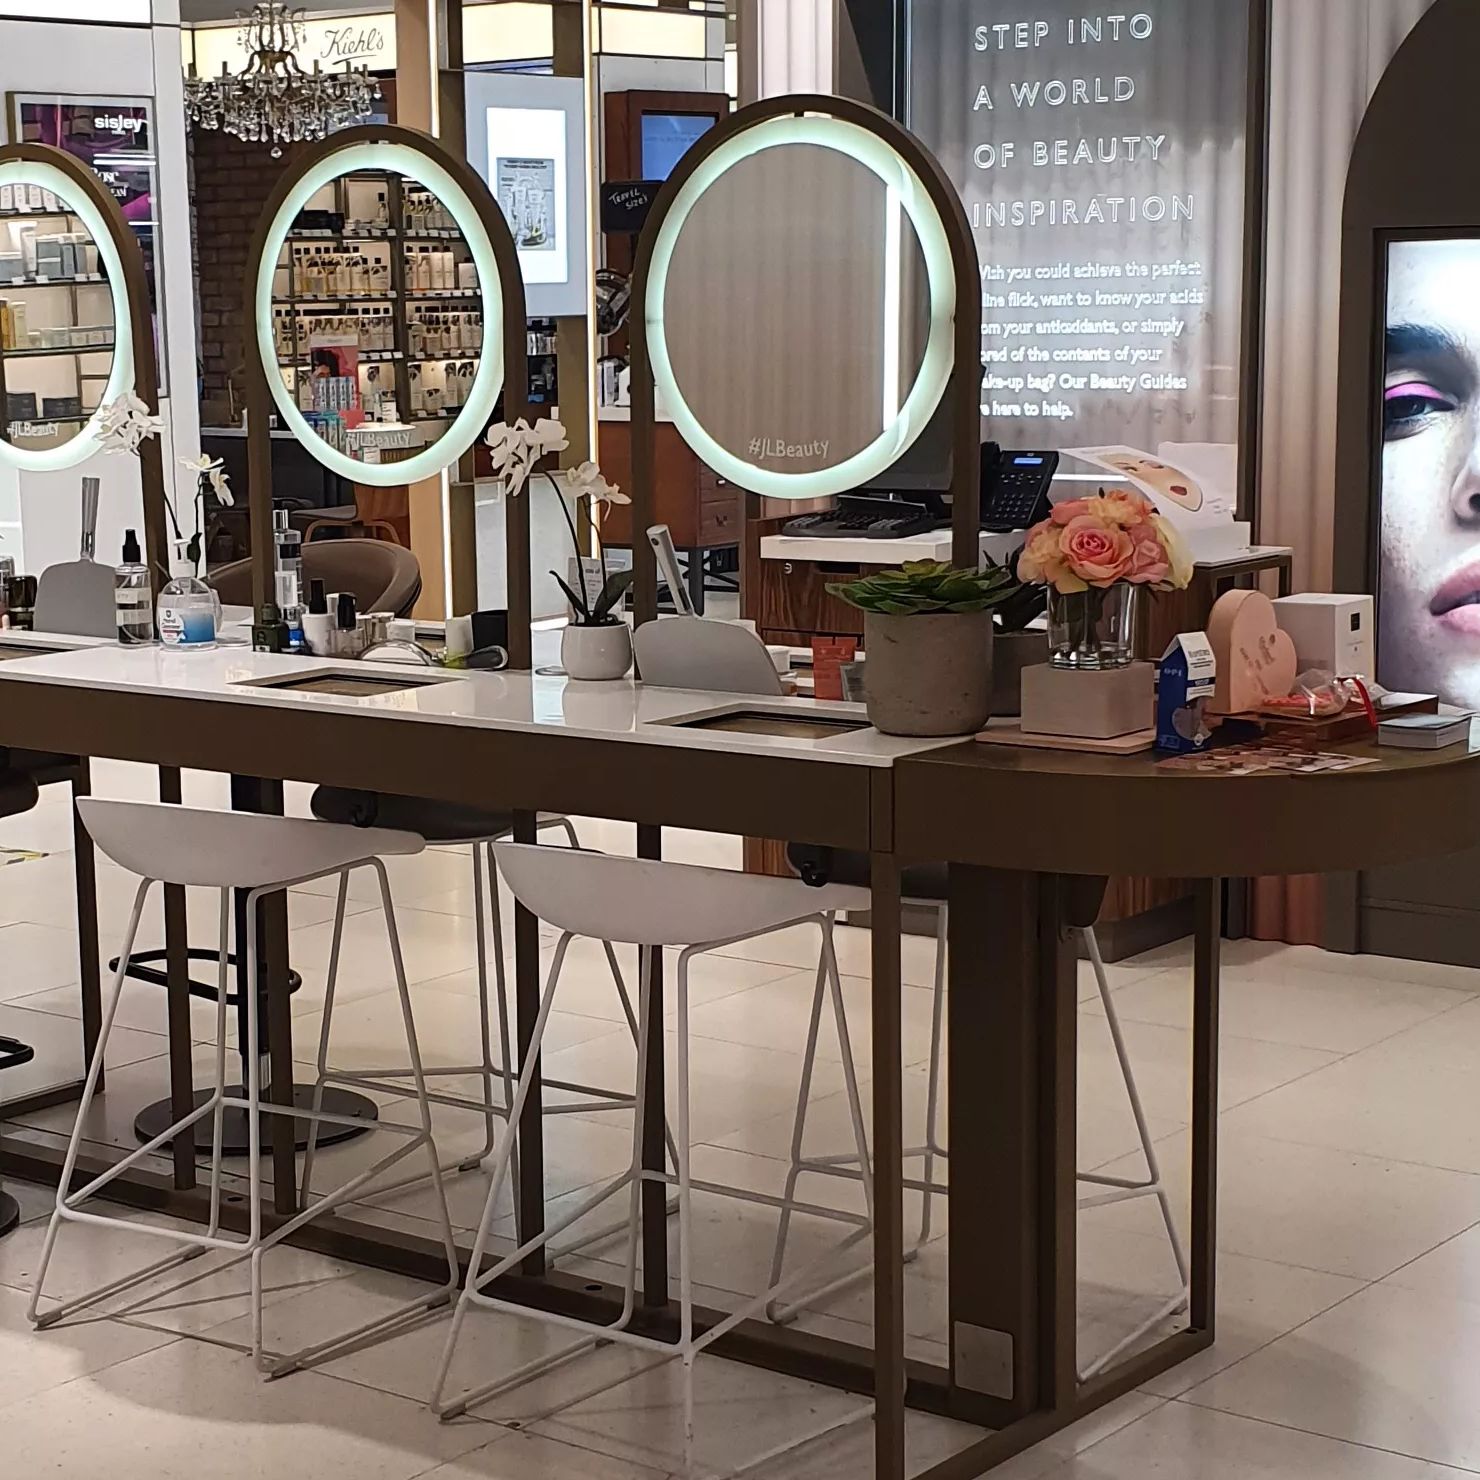 Image of a beauty desk in-store